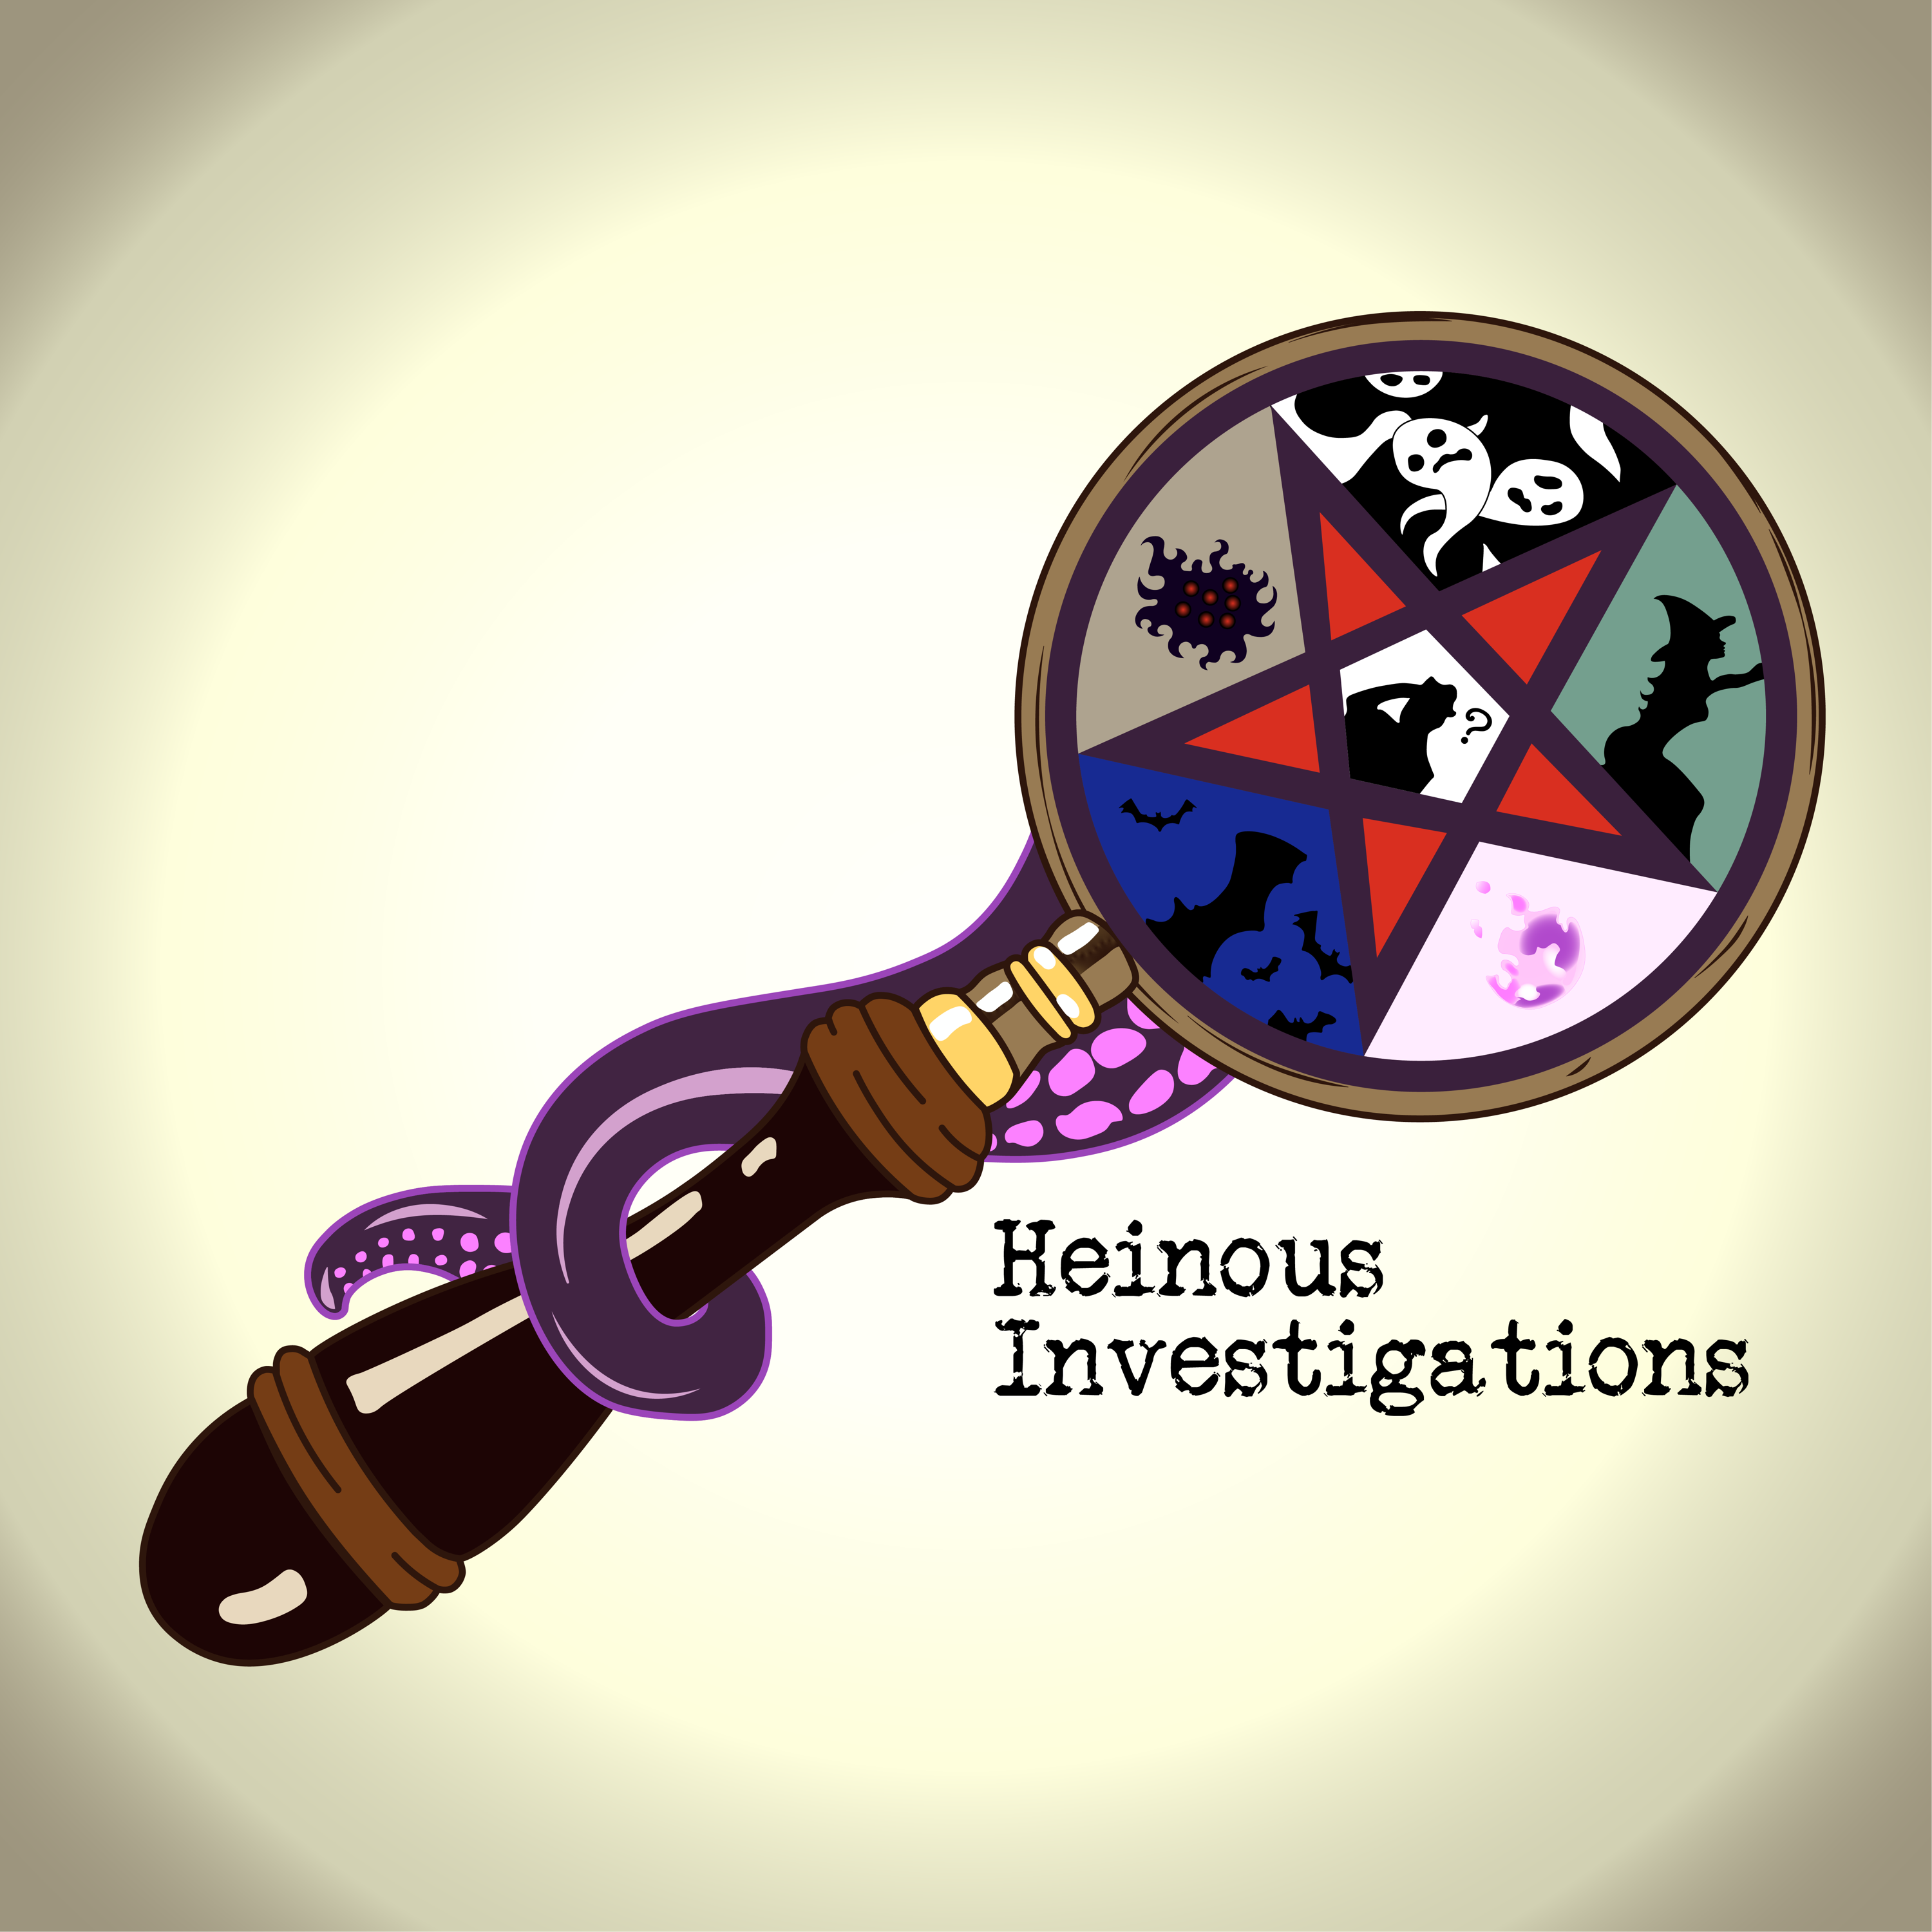 Quick Announcements! Heinous Investigations new episodes and more!